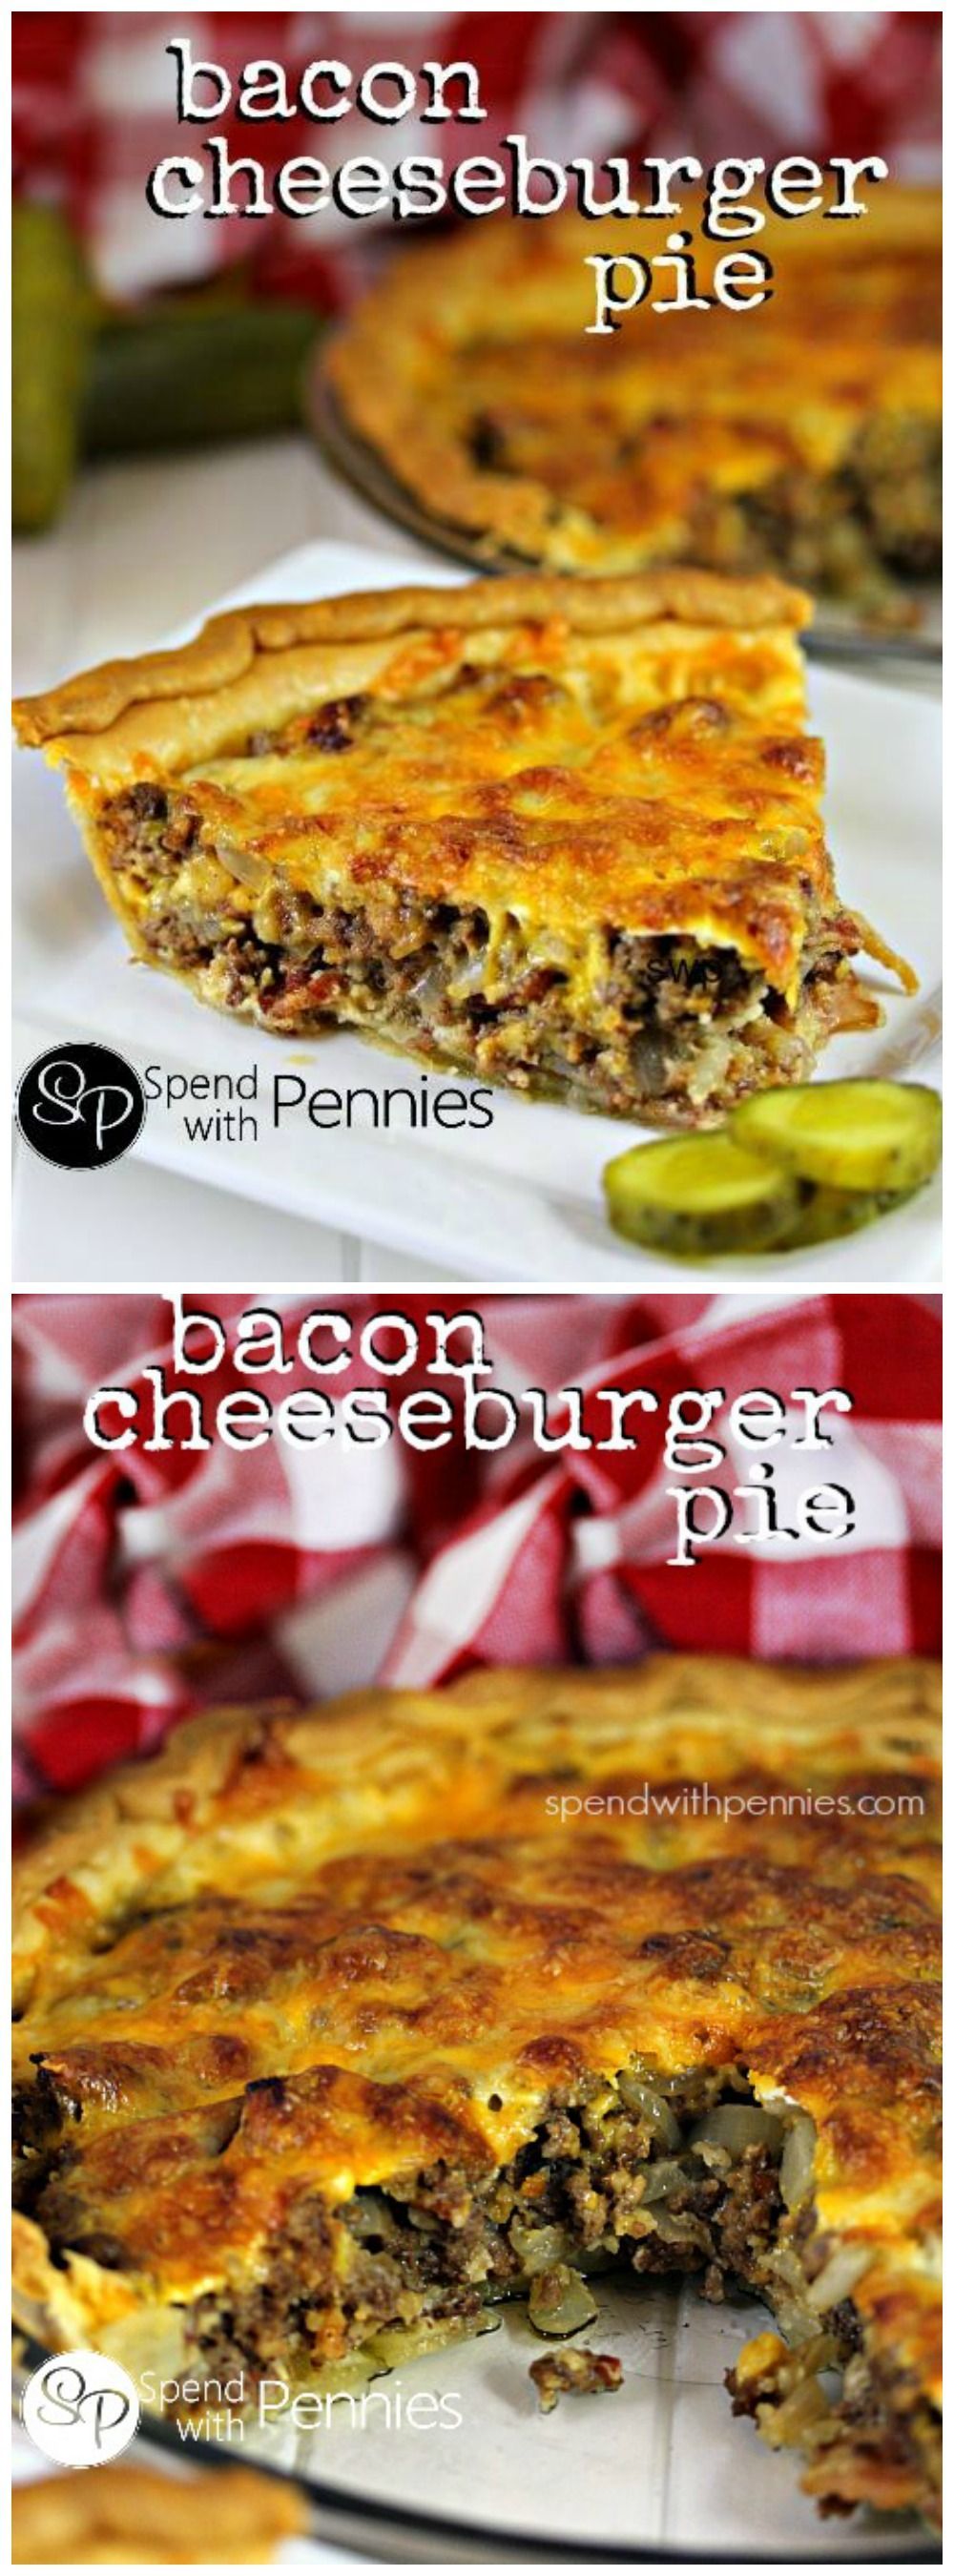 Bacon Cheeseburger Pie!  This easy cheesy recipe is one that your whole family will love!  Ground beef & bacon topped with cheese